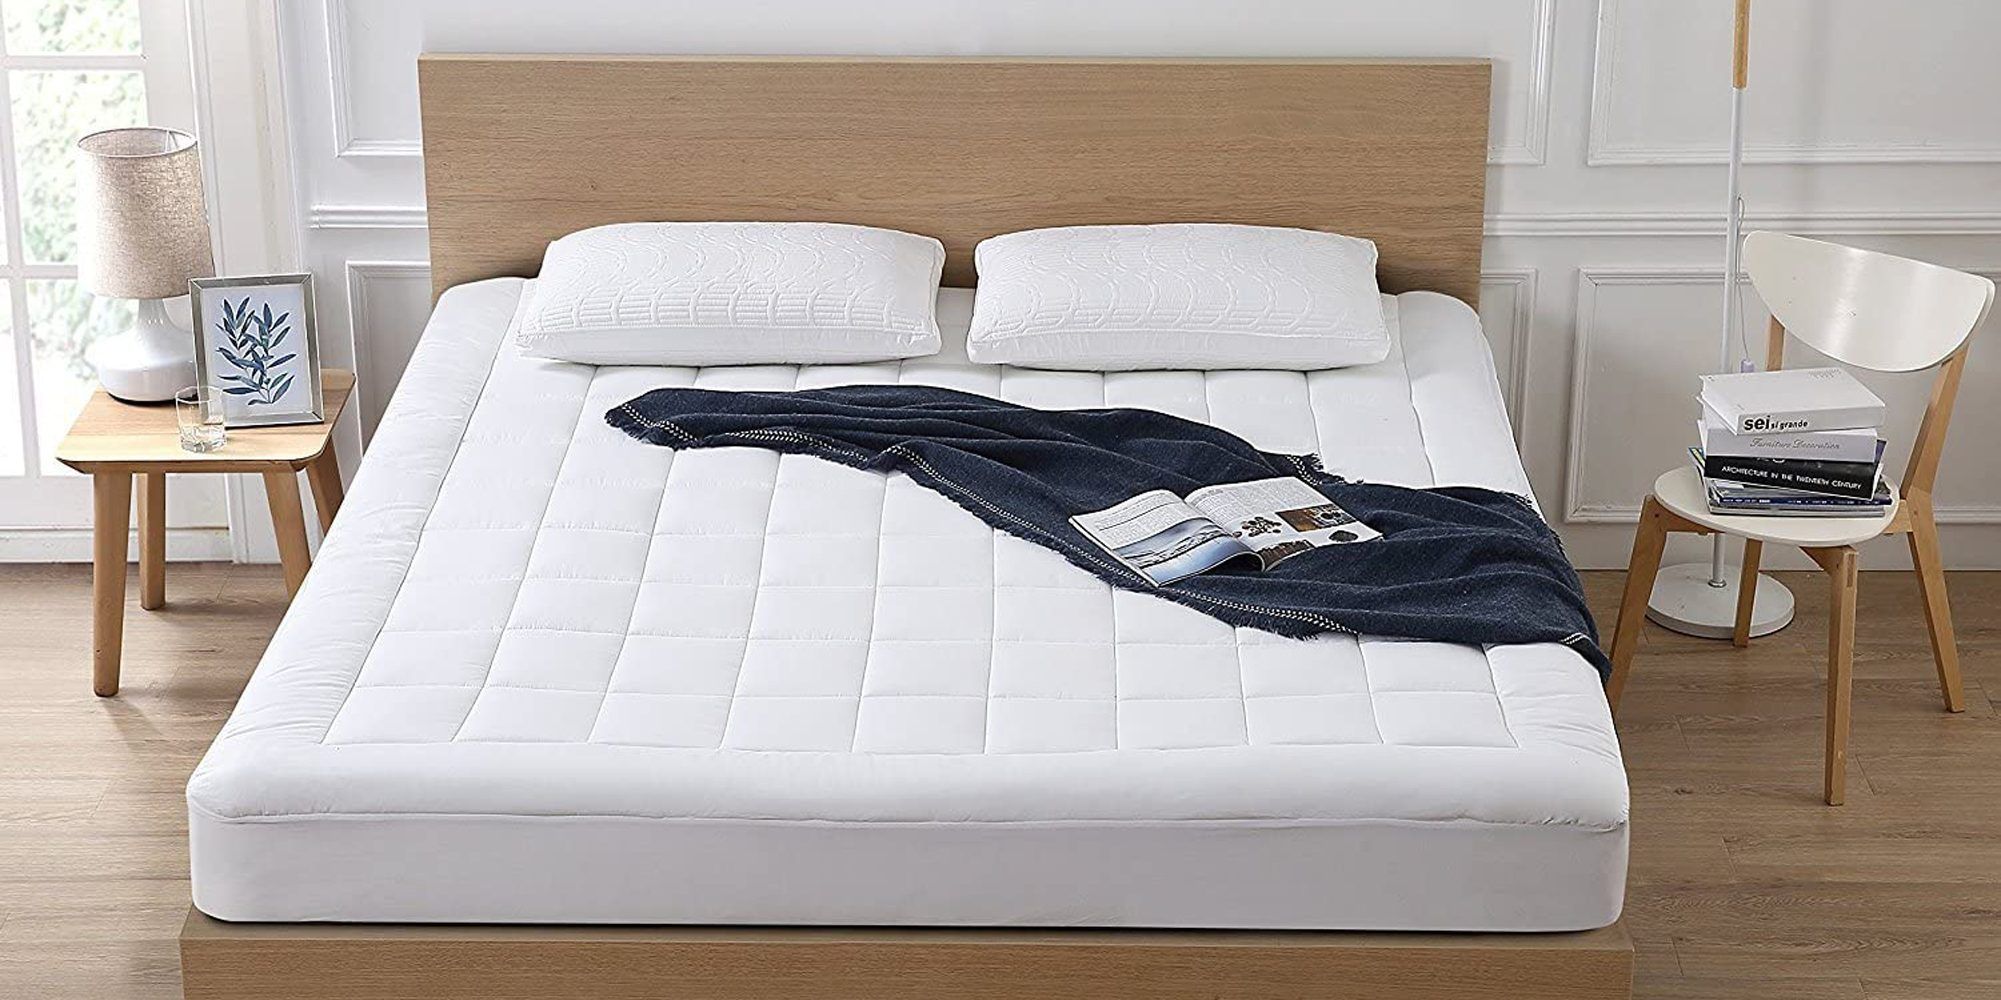 best cooling gel mattresses that are firm